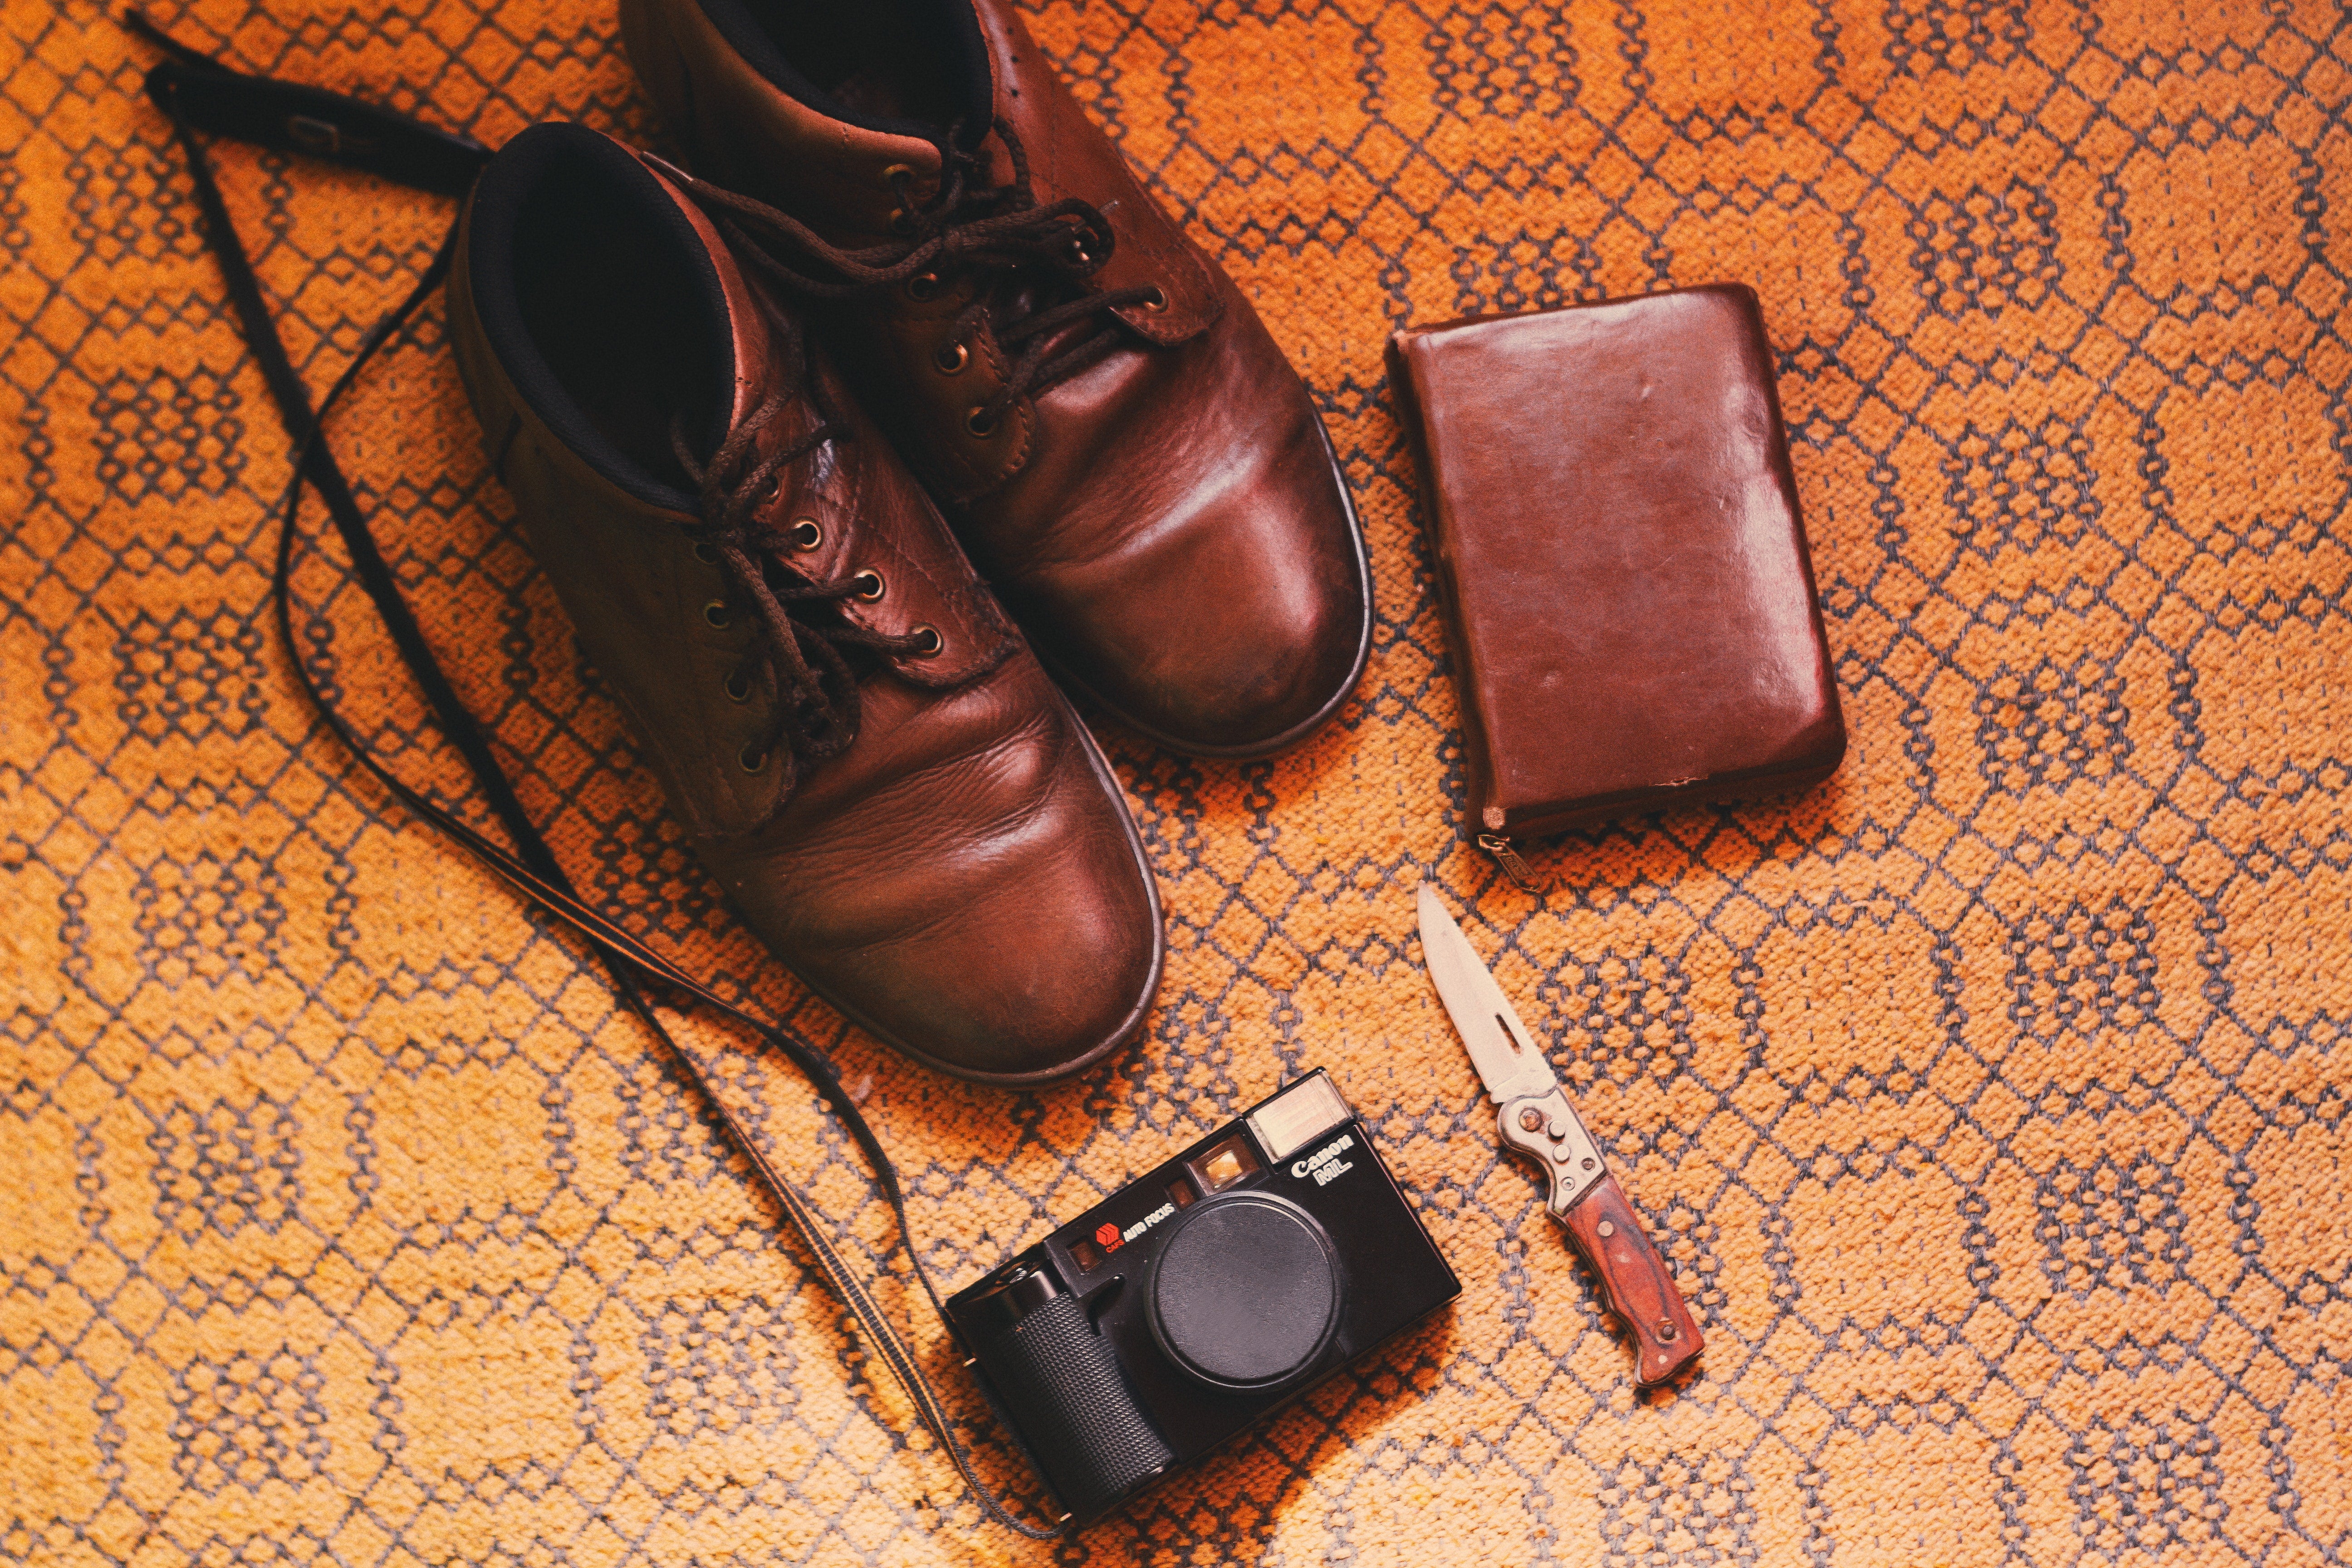 Image with a pair of shoes, wallet and a camera on the floor